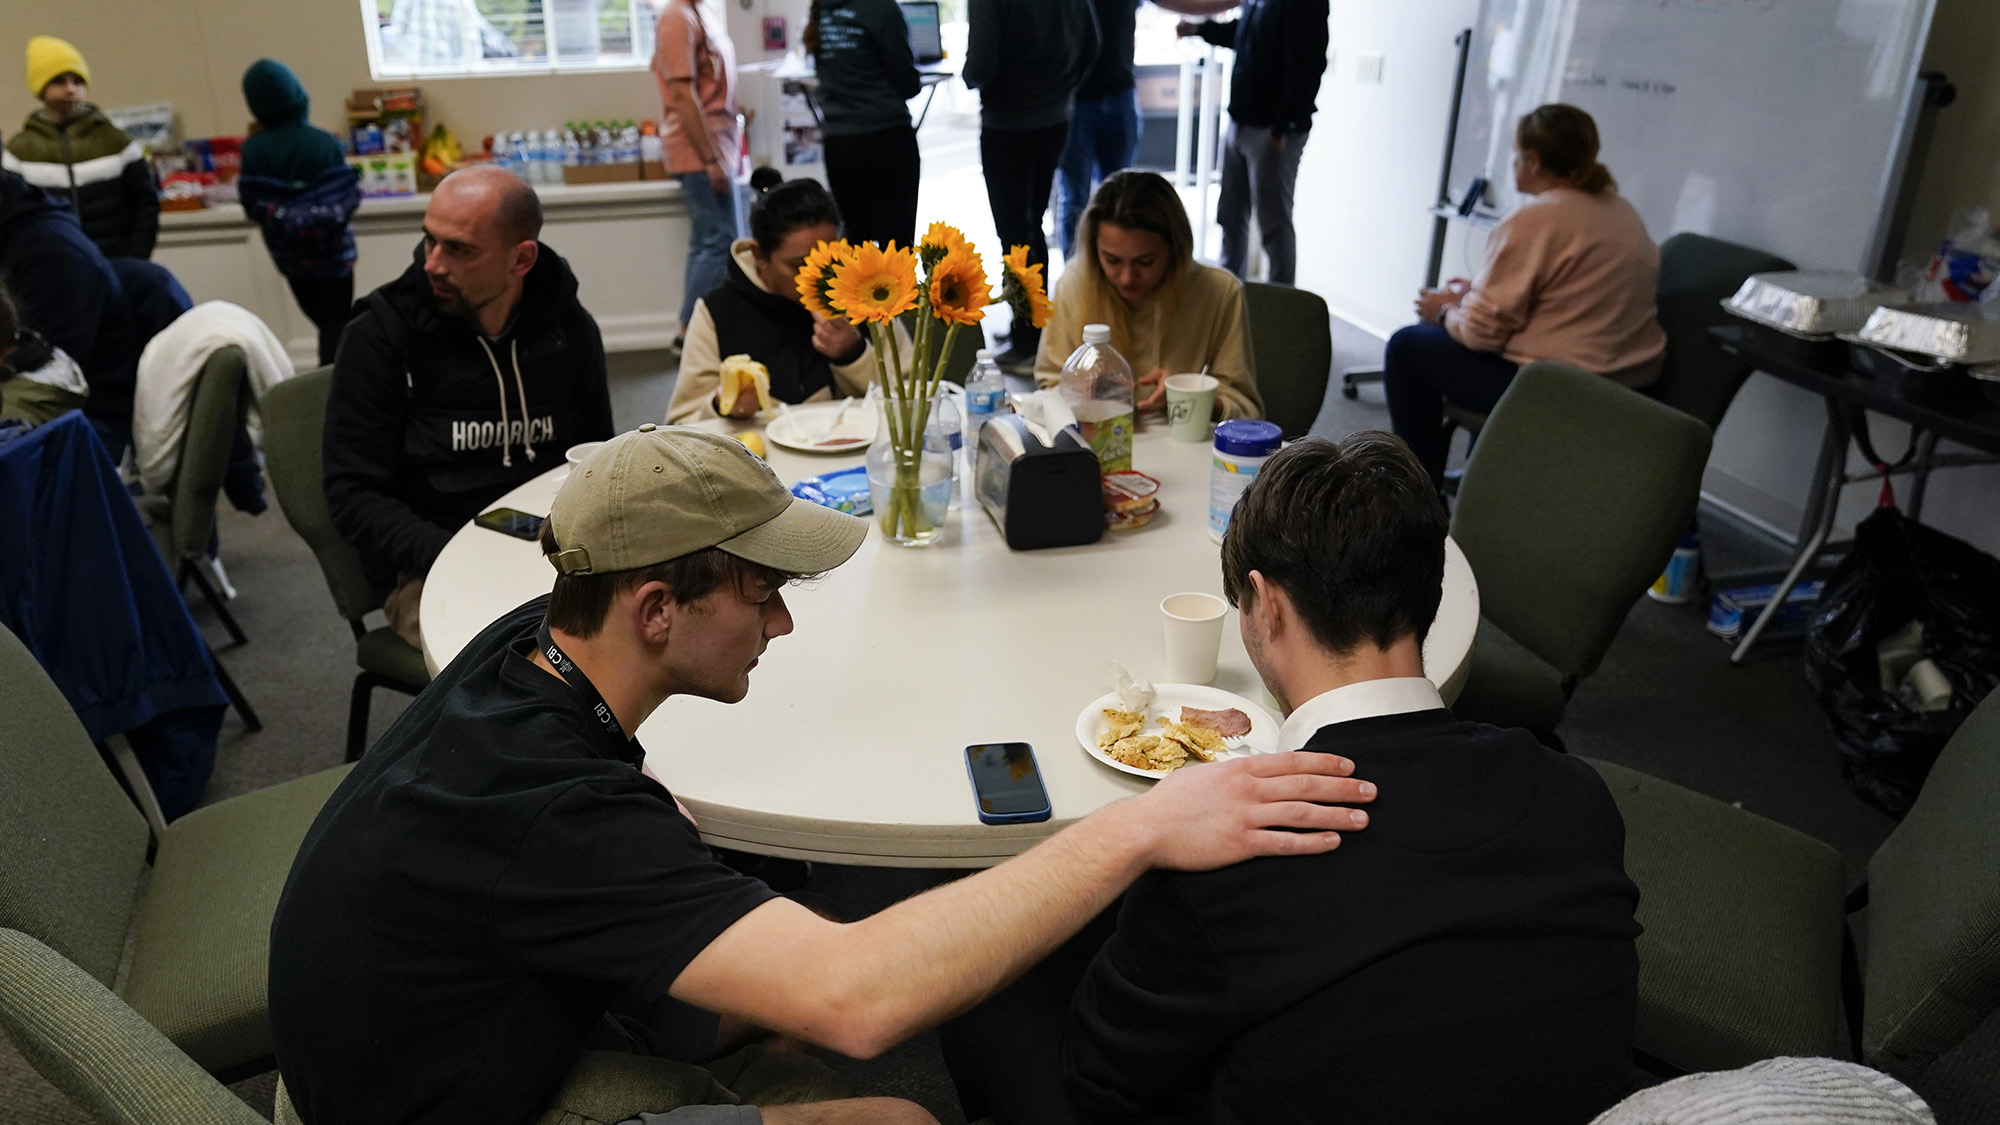 Volunteer Silas Breen, left, from the Calvary Bible Institute, prays with David, from Ukraine, at San Diego Calvary's shelter for Ukrainians after crossing into the United States from Tijuana, Mexico on Friday, April 1.